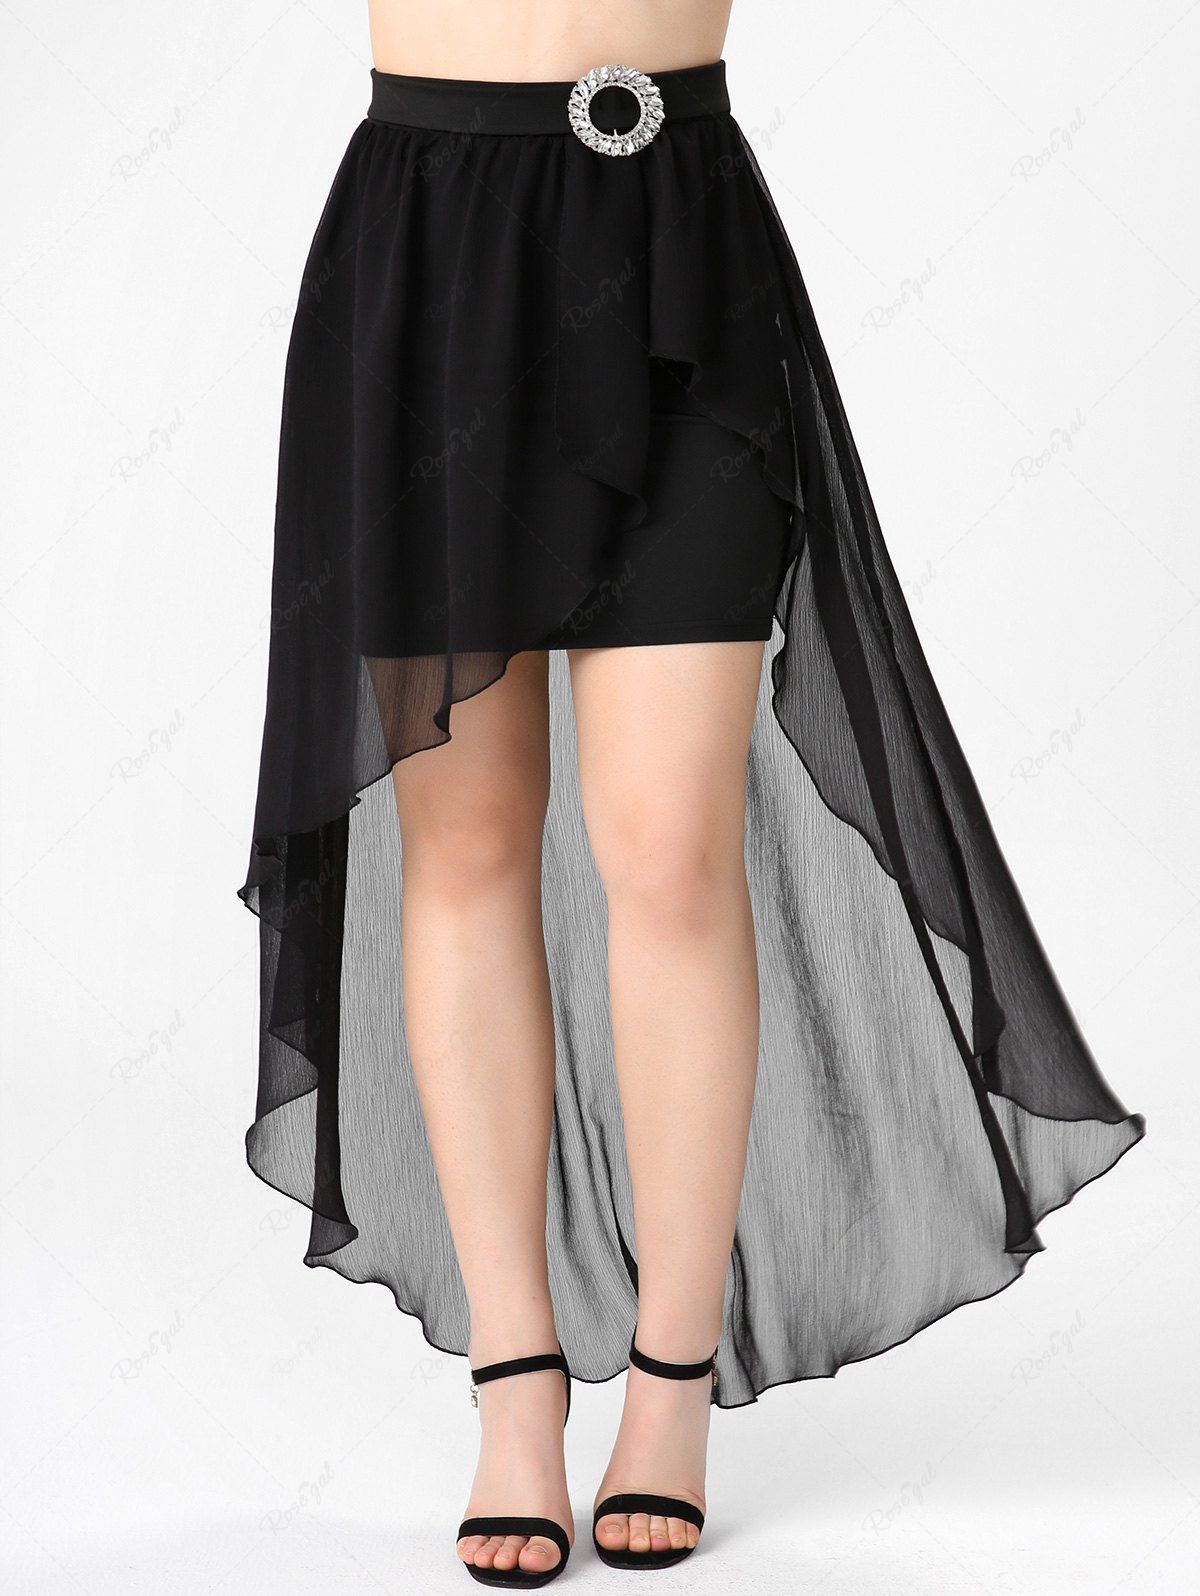 Store Plus Size & Curve Chiffon Overlay High Low Cocktail Skirt  